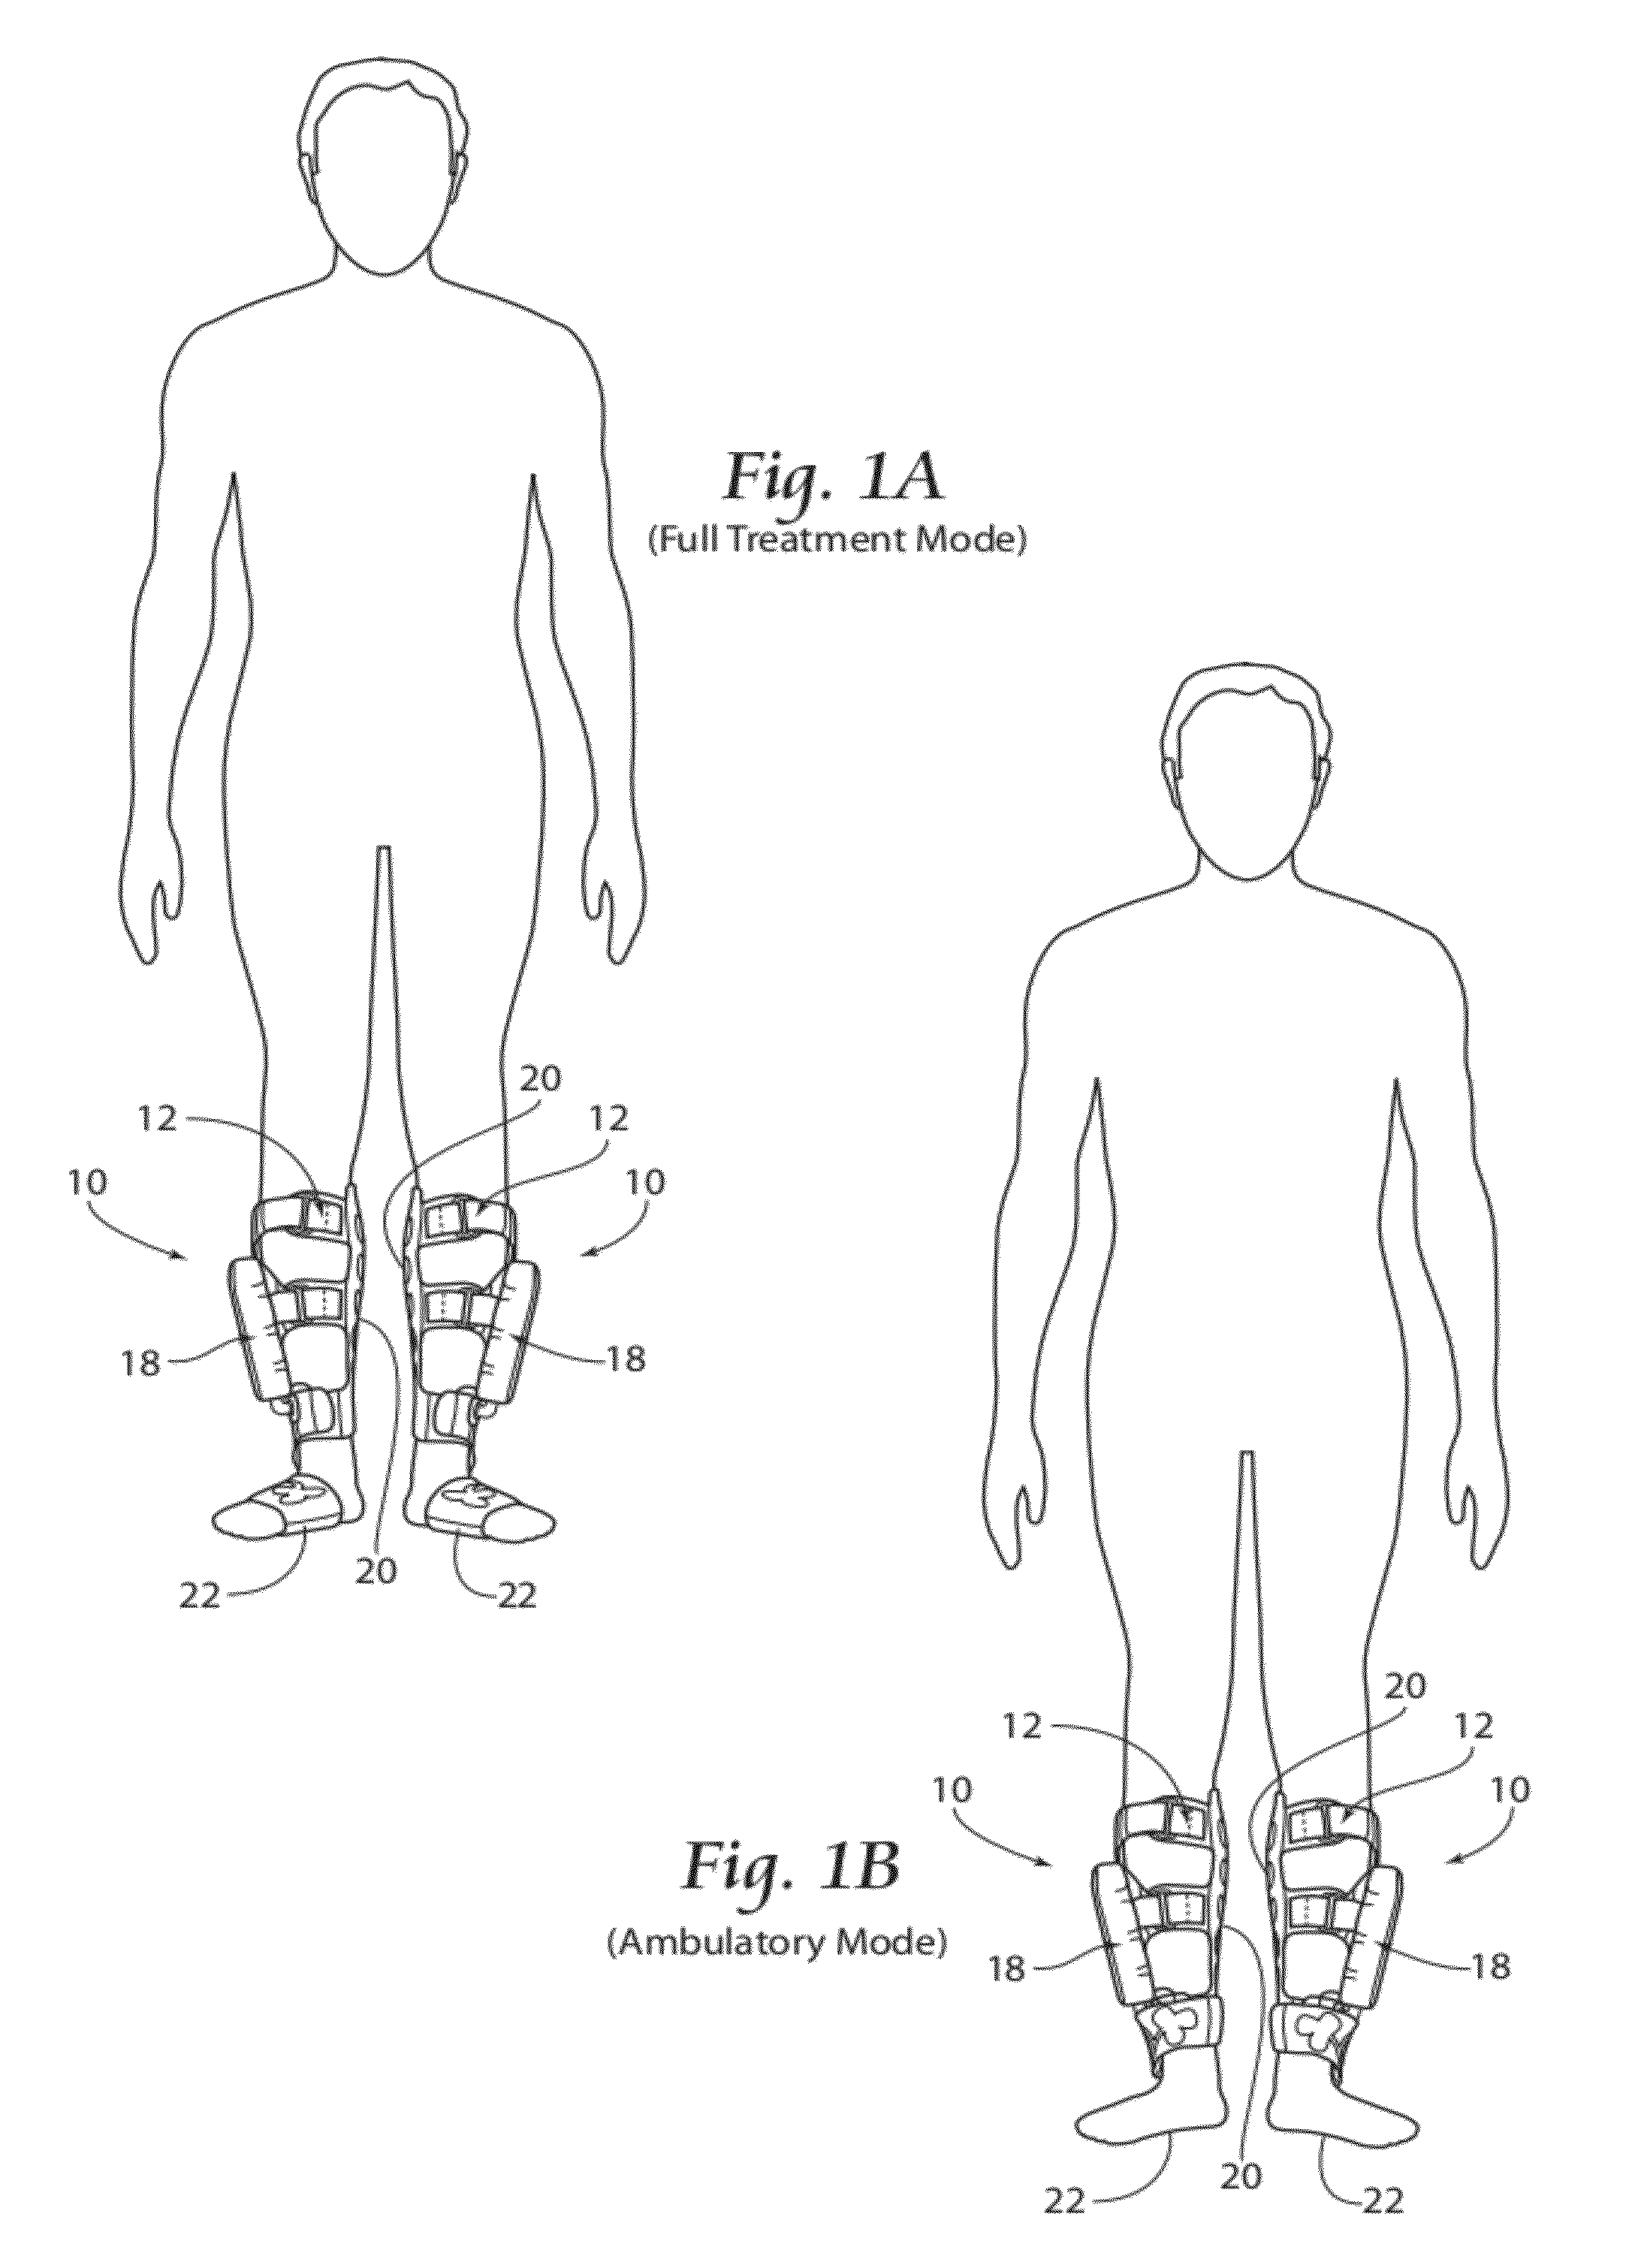 Apparatus, systems, and methods for augmenting the flow of fluid within body vessels